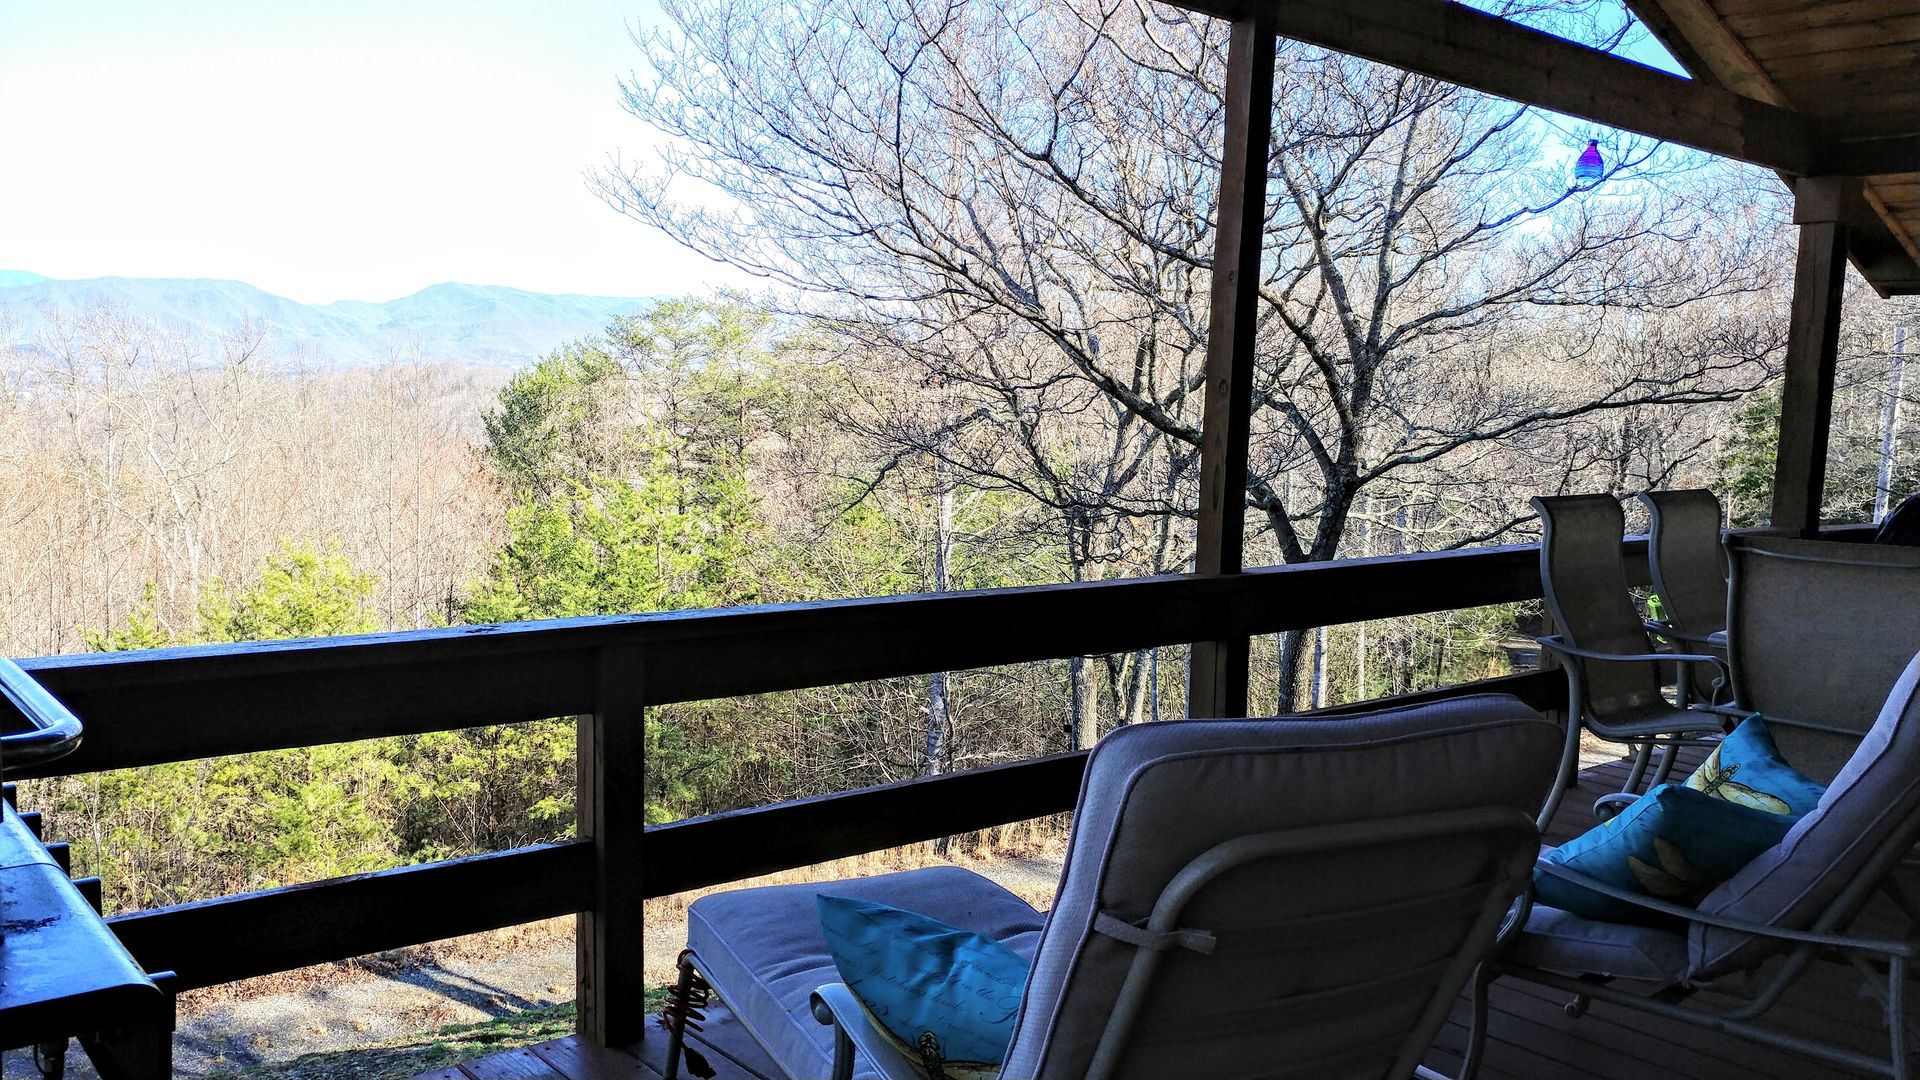 Patio with Great Smoky Mountains Views!